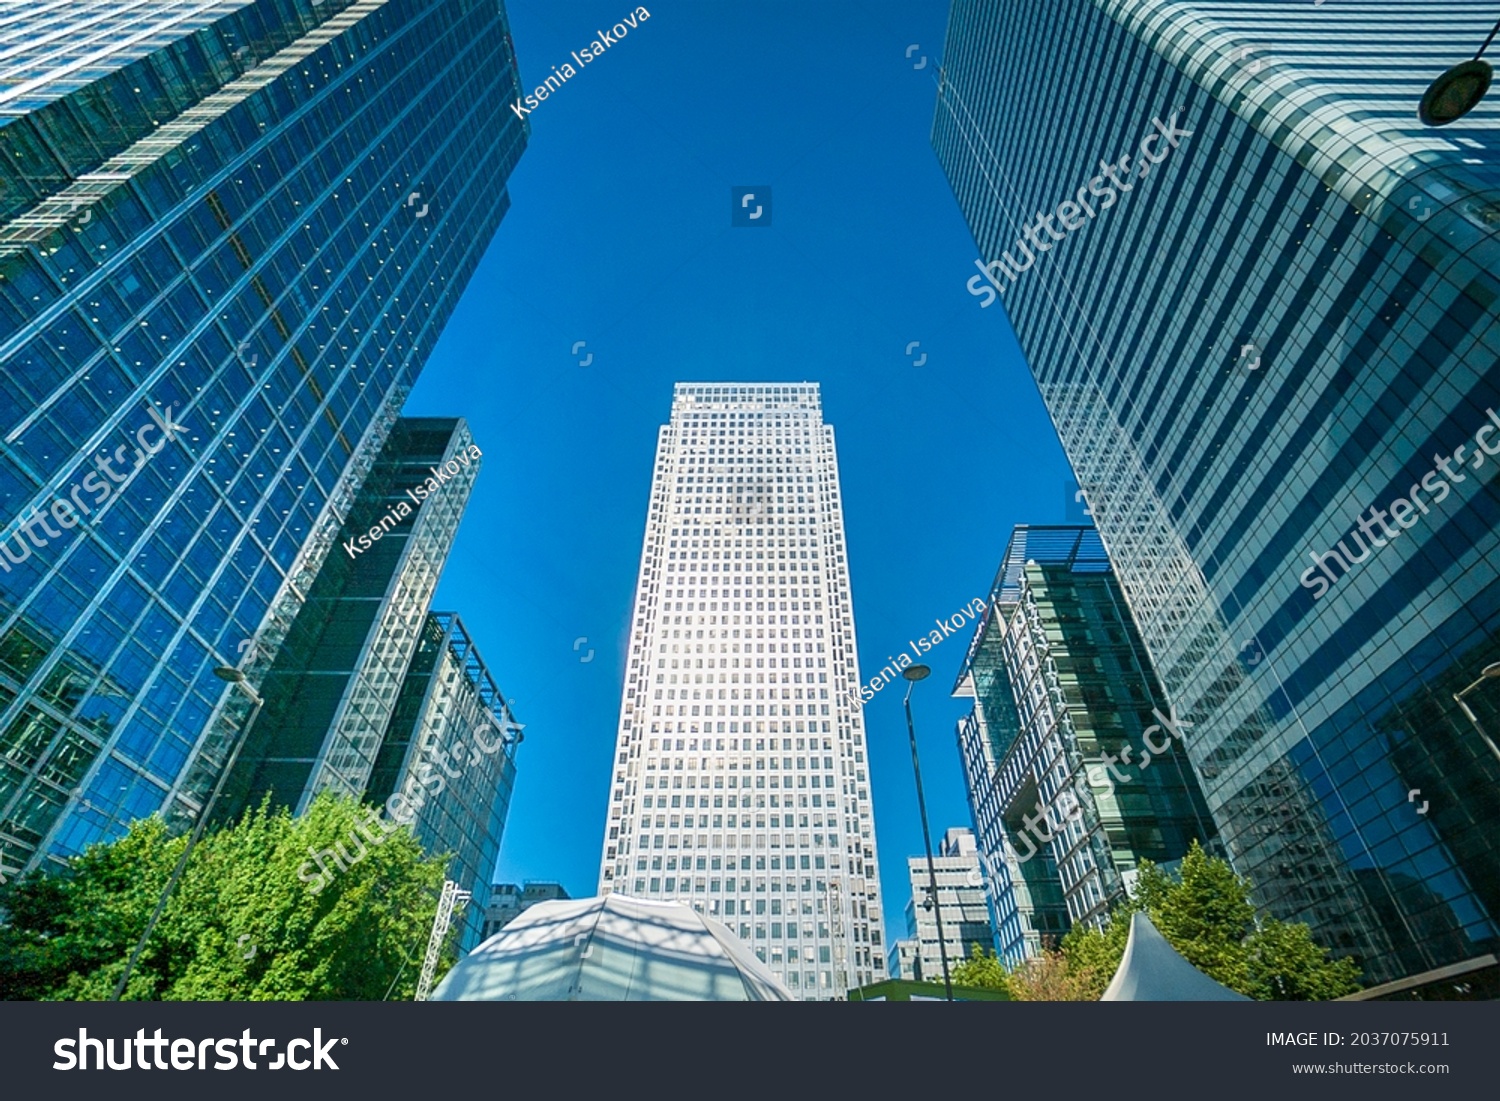 Office buildings, skyscrapers, blue sky, sunny day in the business district of London Canary Wharf, UK. Can be used for websites, brochures, posters, printing and design. #2037075911